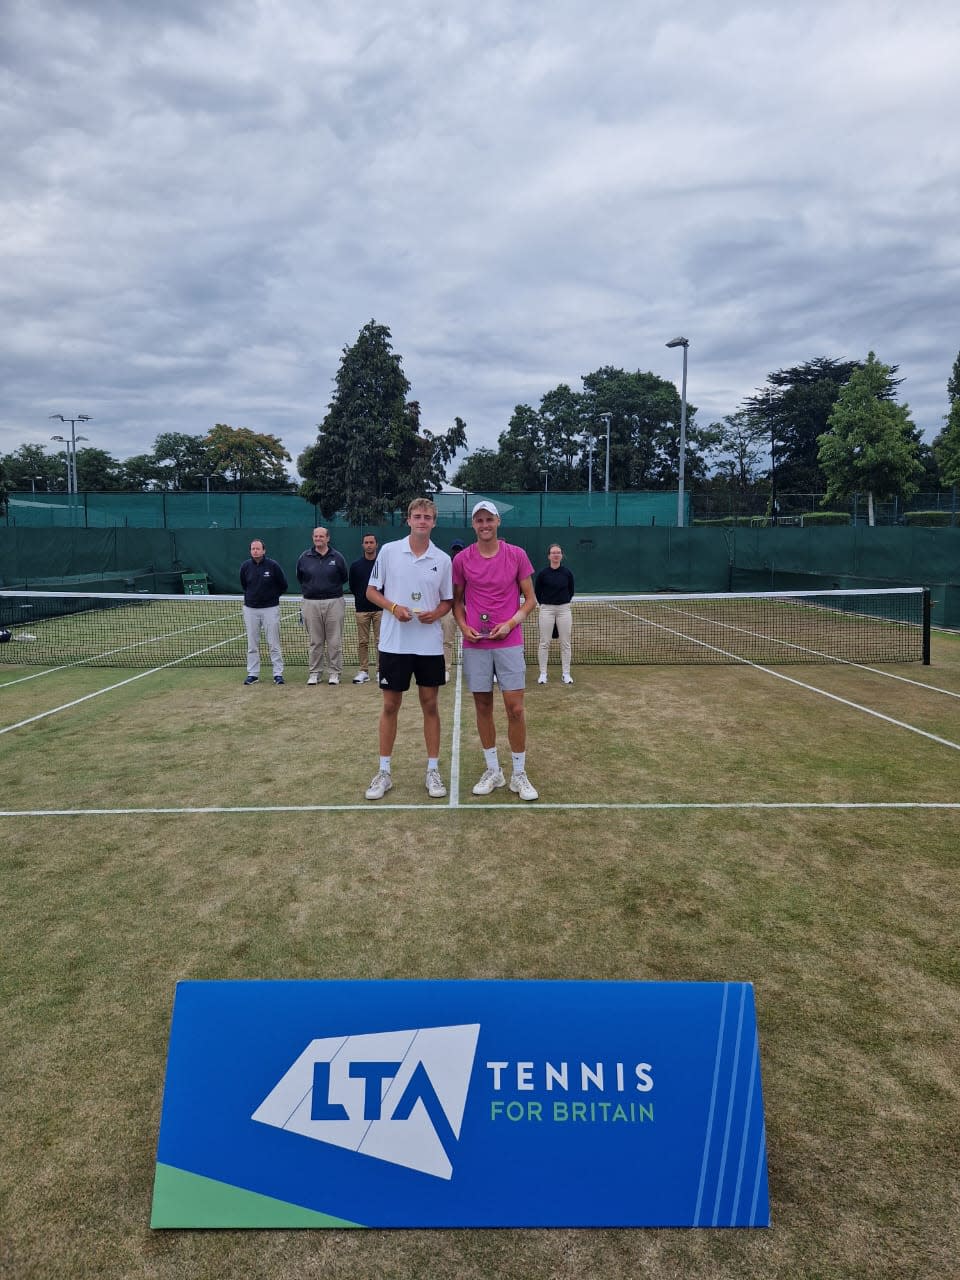 Hudd and Monday after winning at the National Tennis Centre